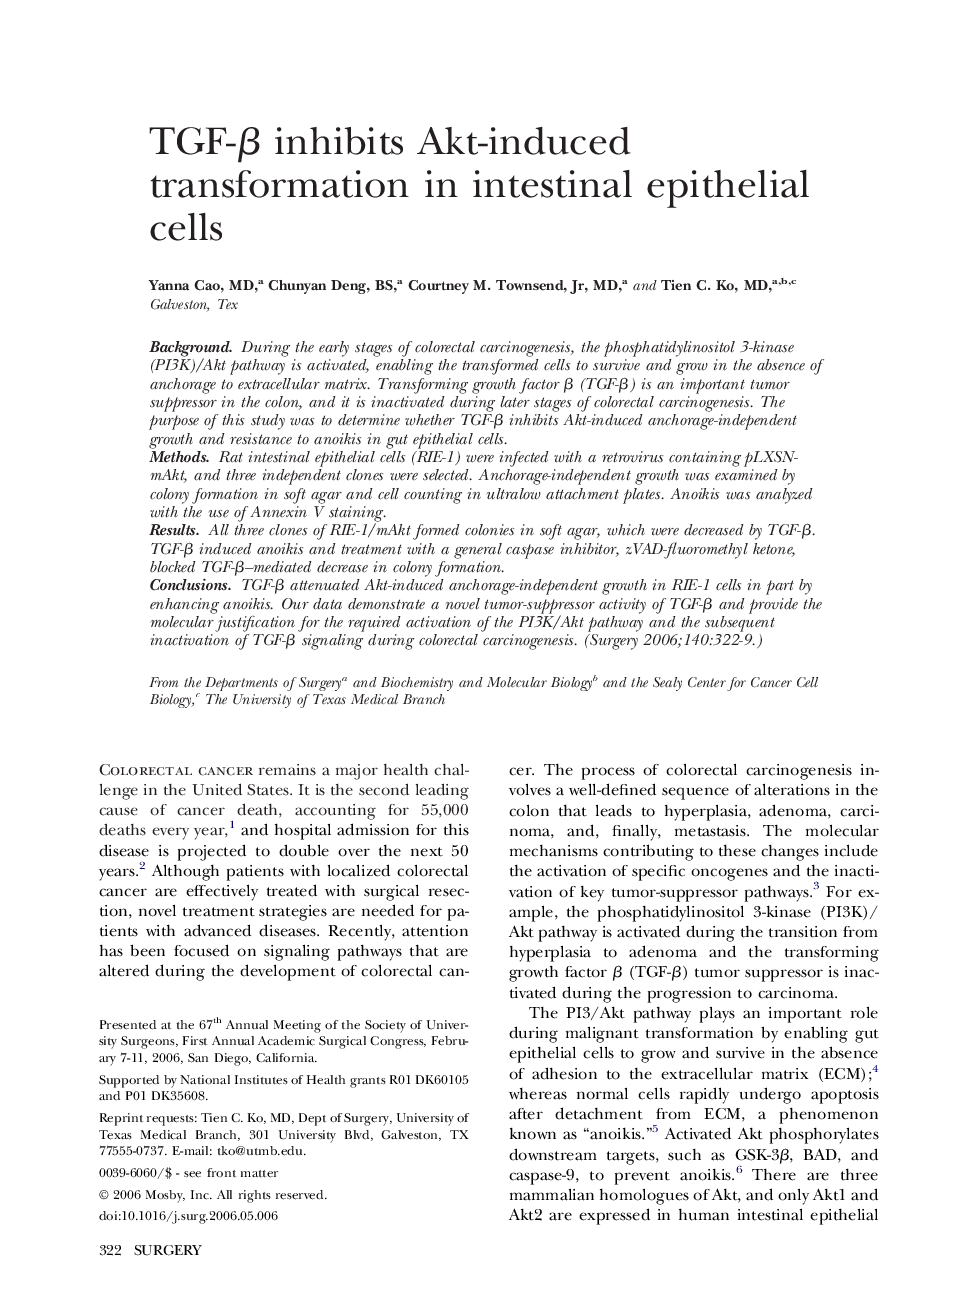 TGF-β inhibits Akt-induced transformation in intestinal epithelial cells 